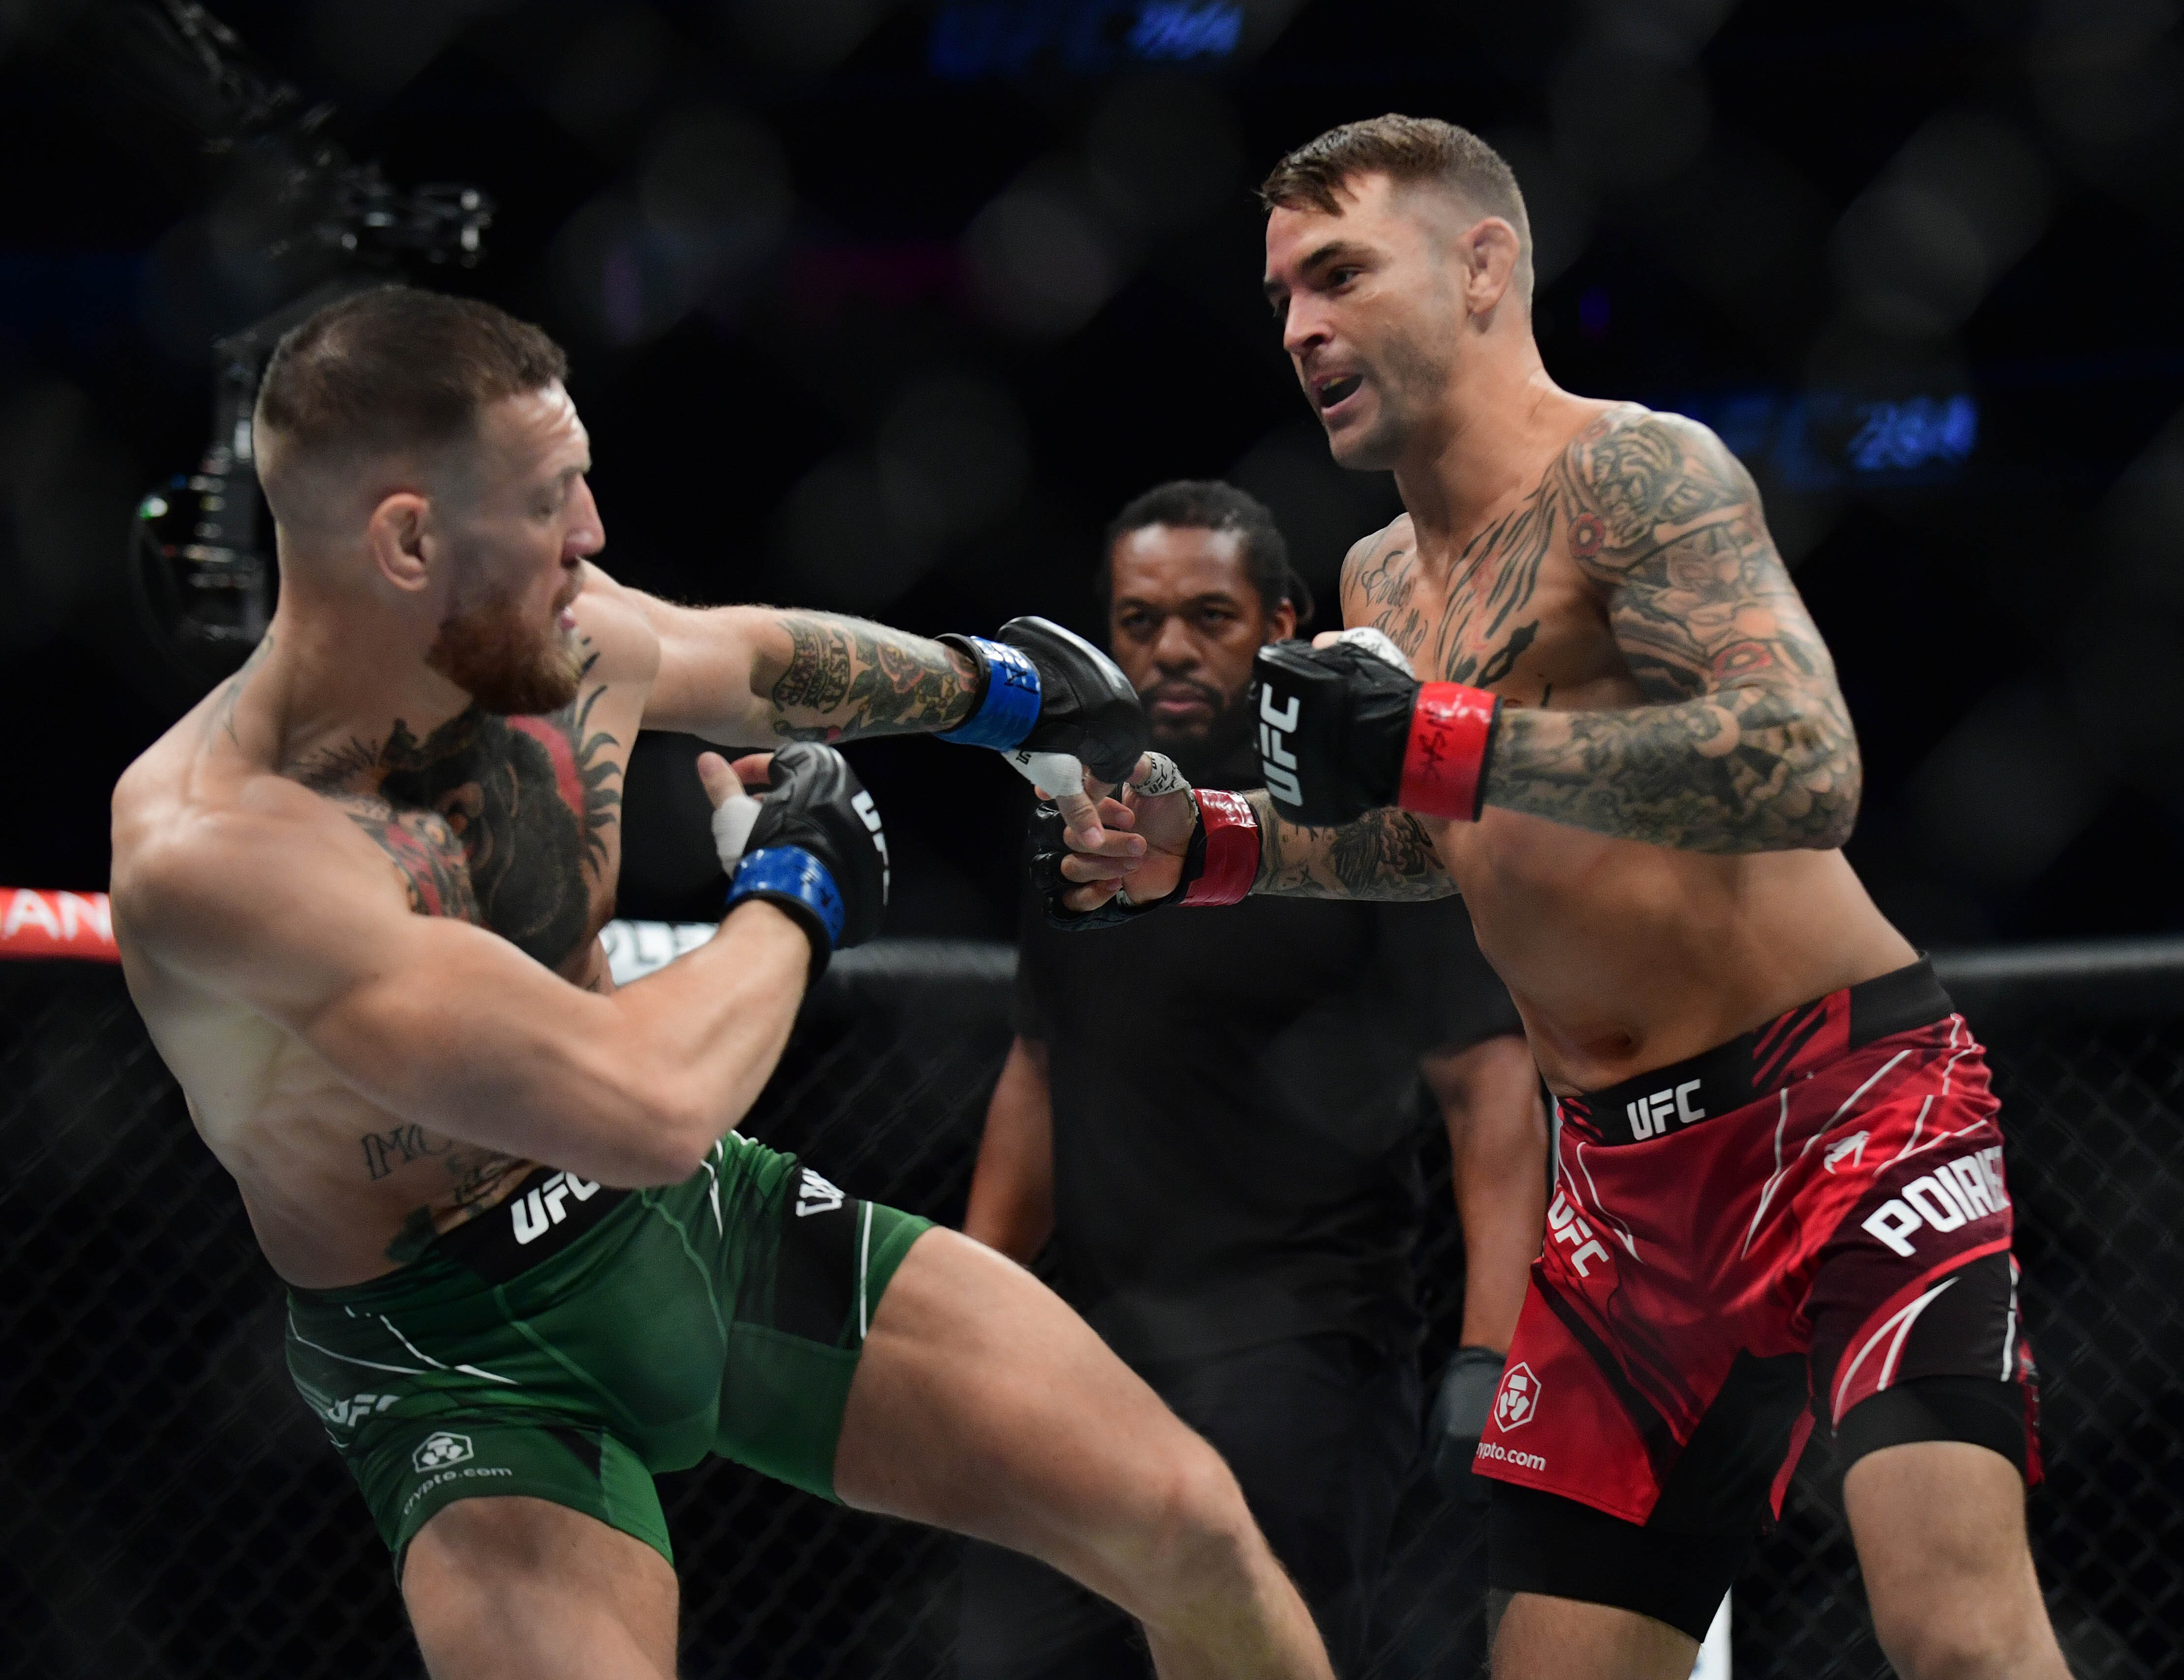 Dustin Poirier moves in for a hit against Conor McGregor at UFC 264. Photo: USA TODAY Sports